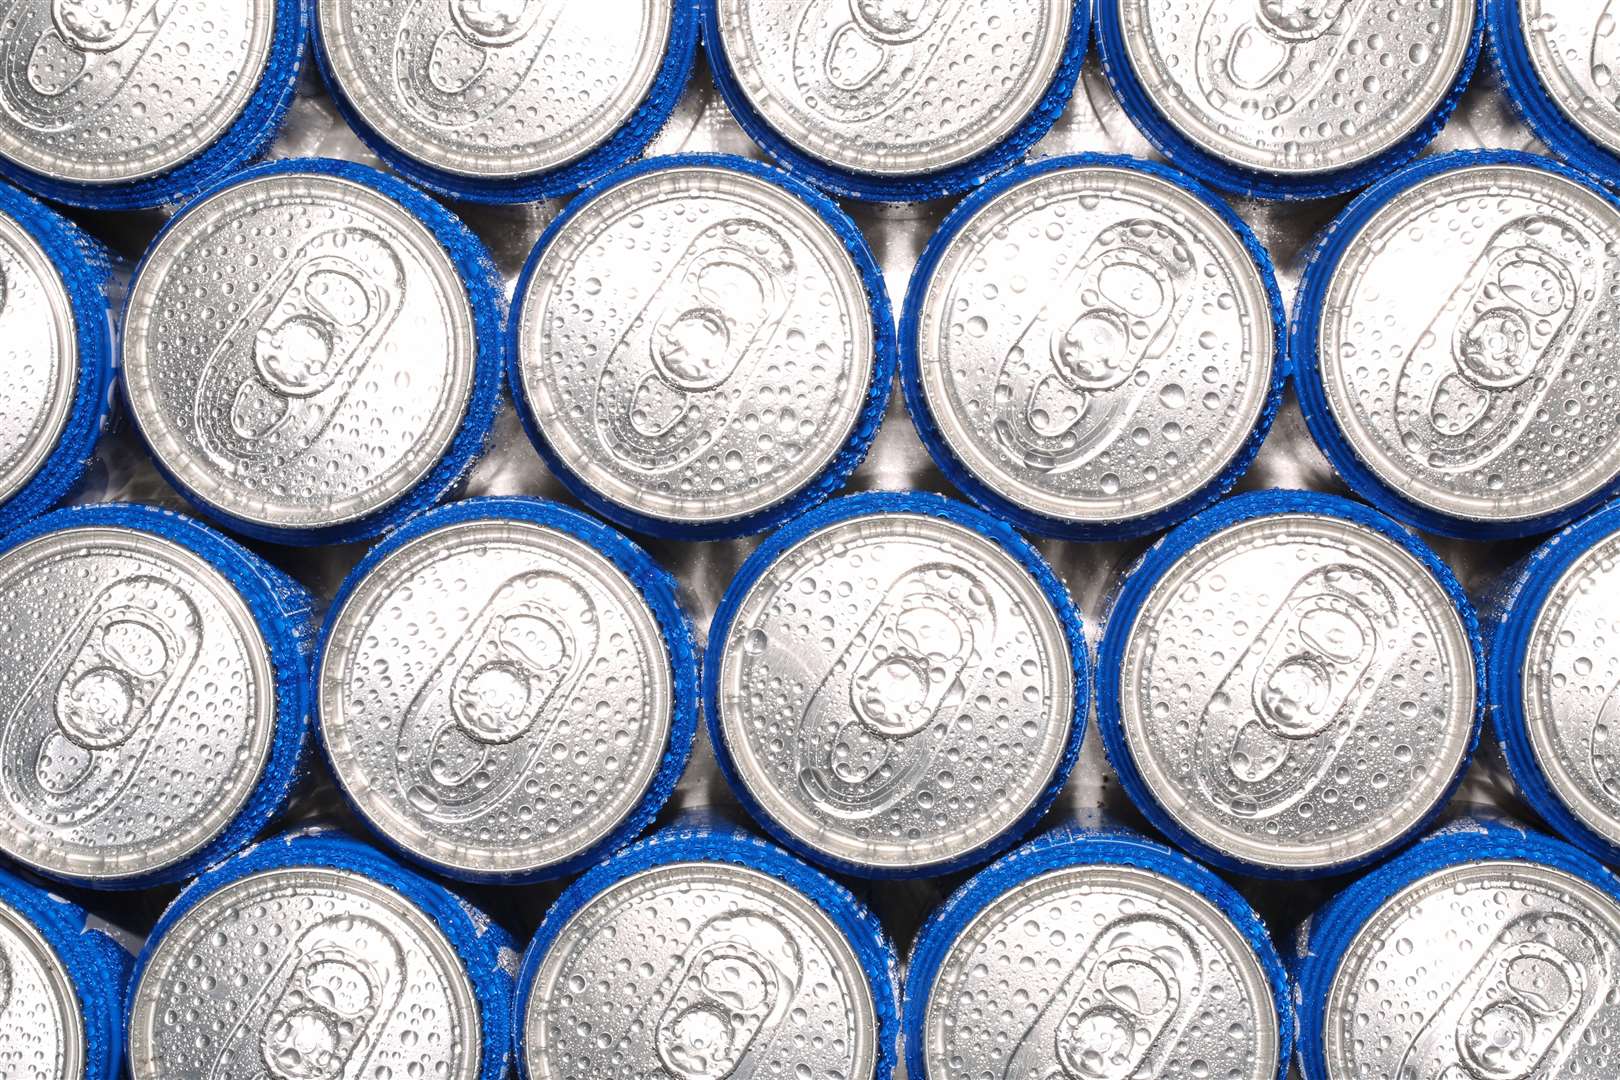 The energy drinks often contain high levels of caffeine and sometimes sugar